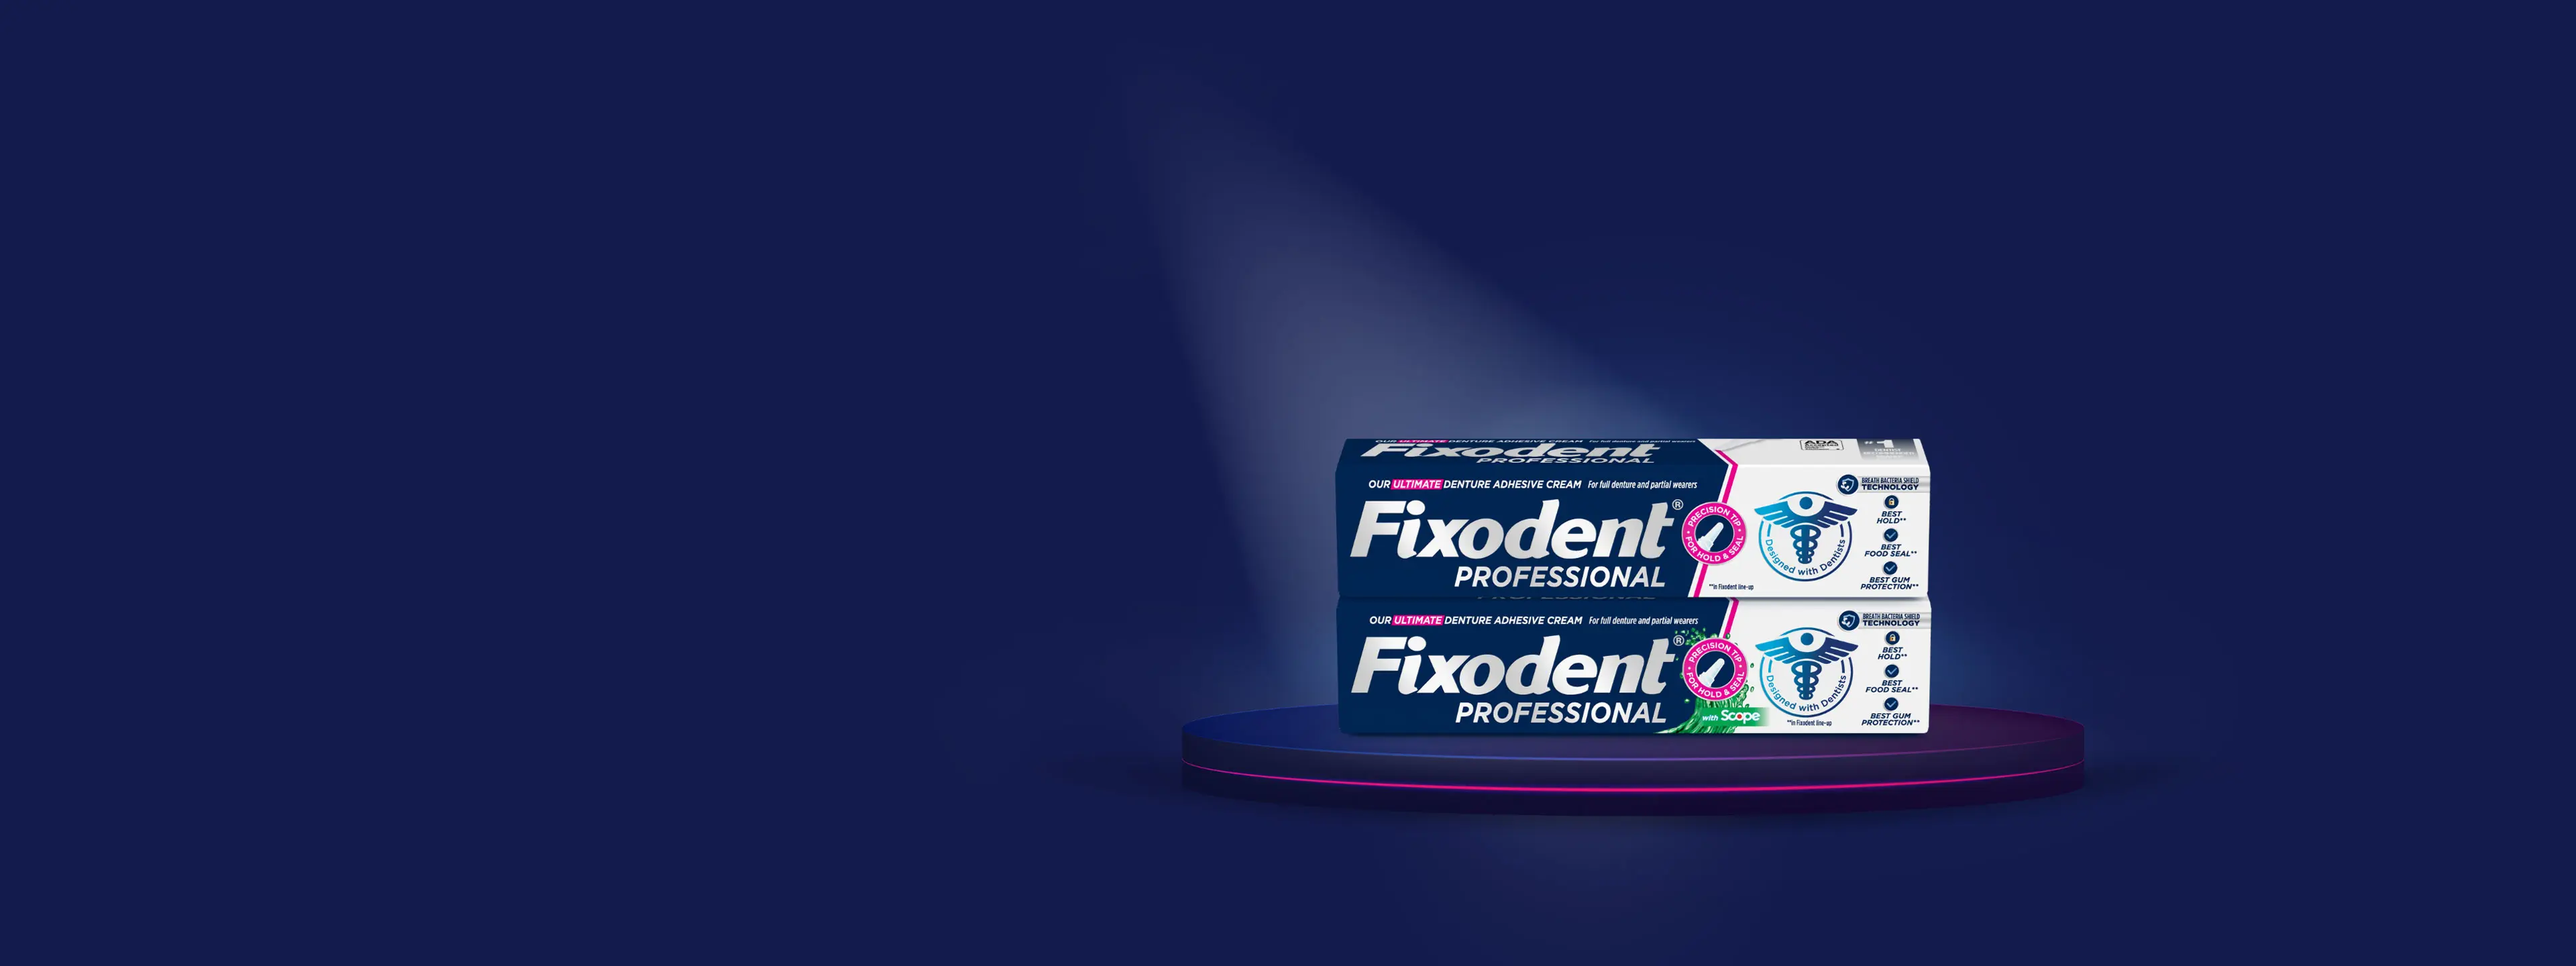 Meet Fixodent Professional and Professional with Scope Stay confident all day with Fixodent’s best hold, food seal, and gum protection all in one.